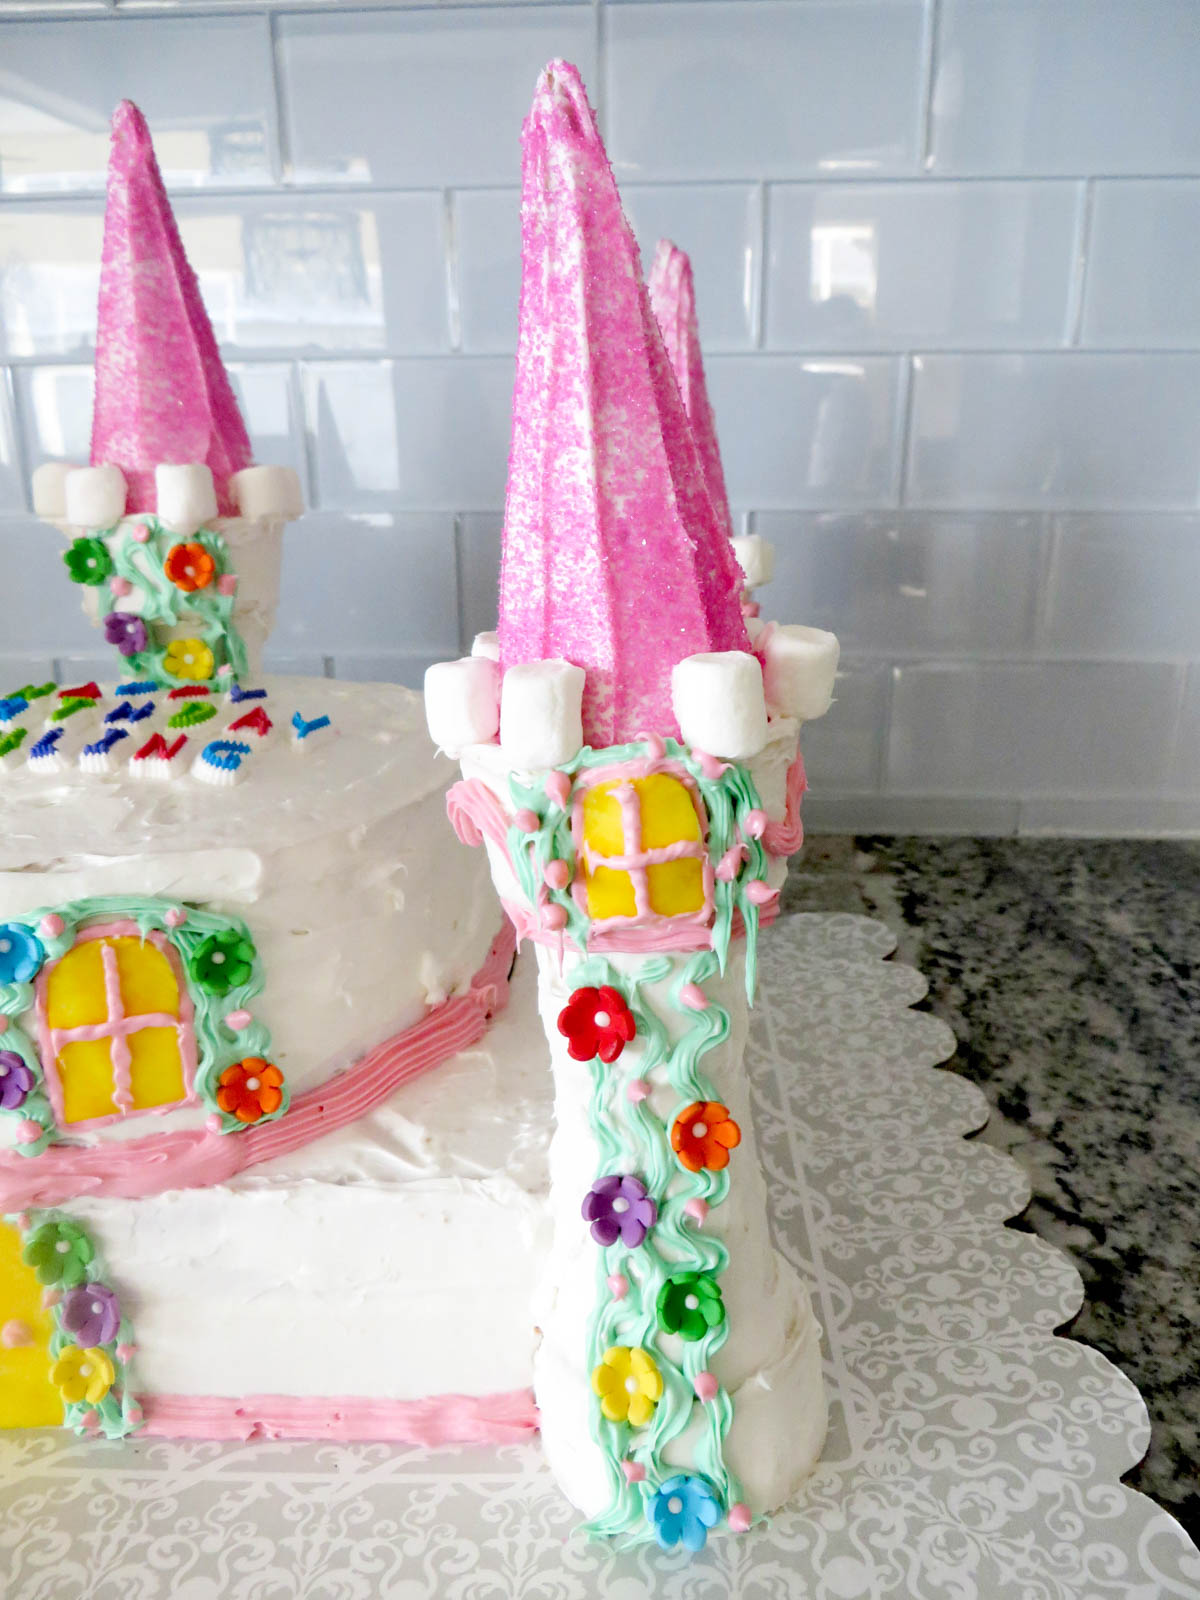 A whimsical castle-shaped cake with pink turrets, colorful flowers, and marshmallow details on a kitchen counter.